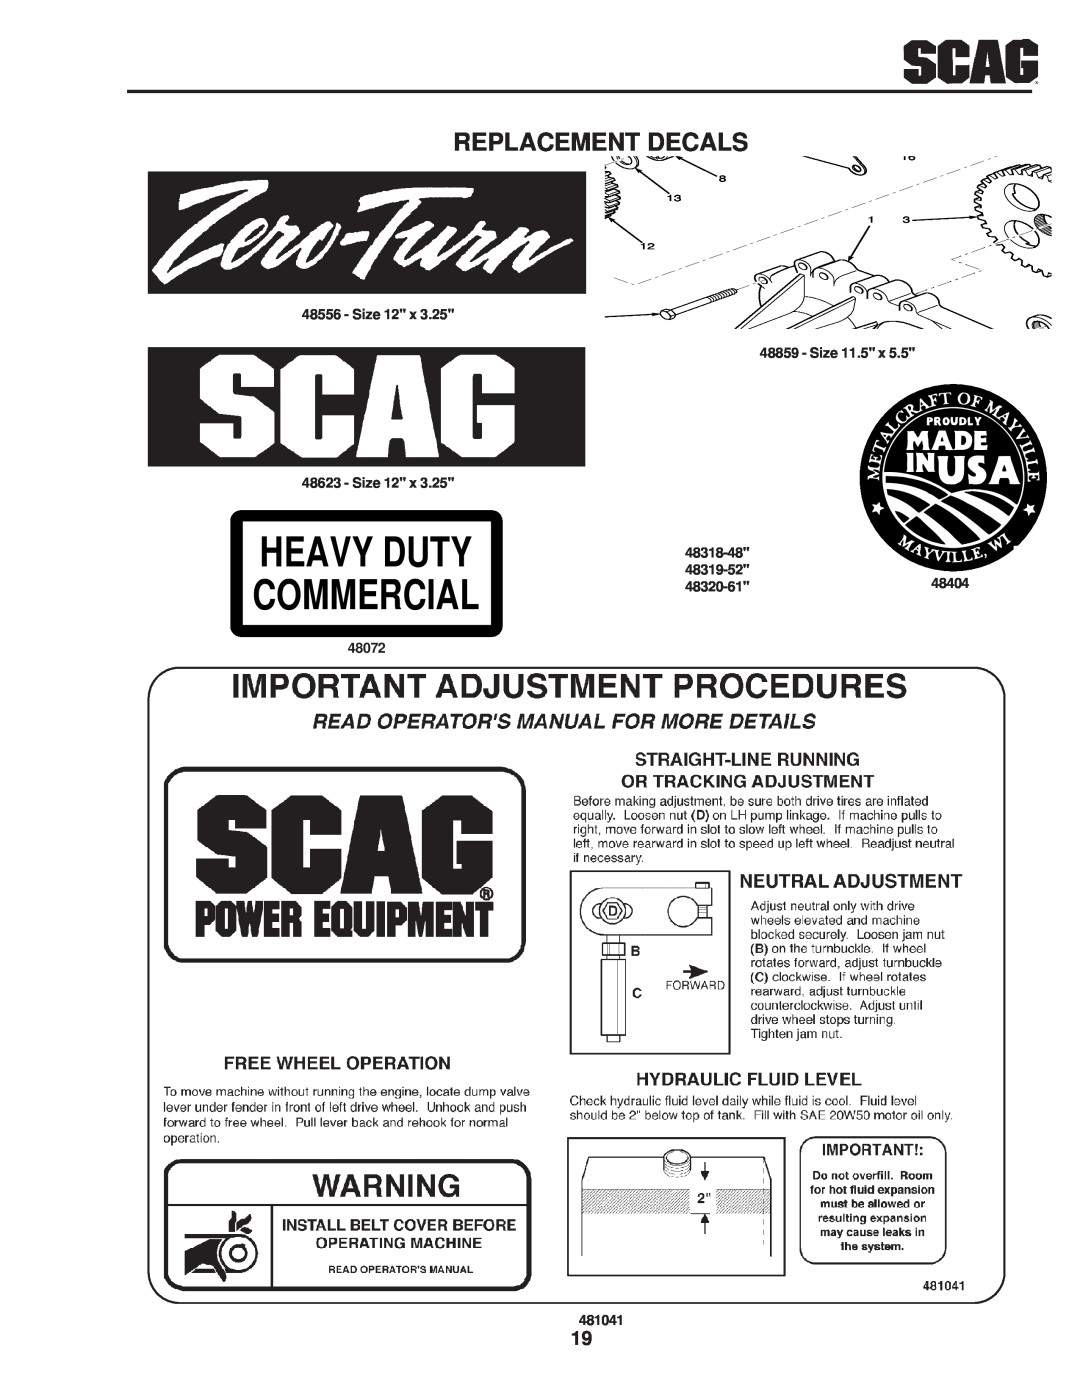 Scag Power Equipment SSZ operating instructions Replacement Decals, Heavy Duty Commercial 